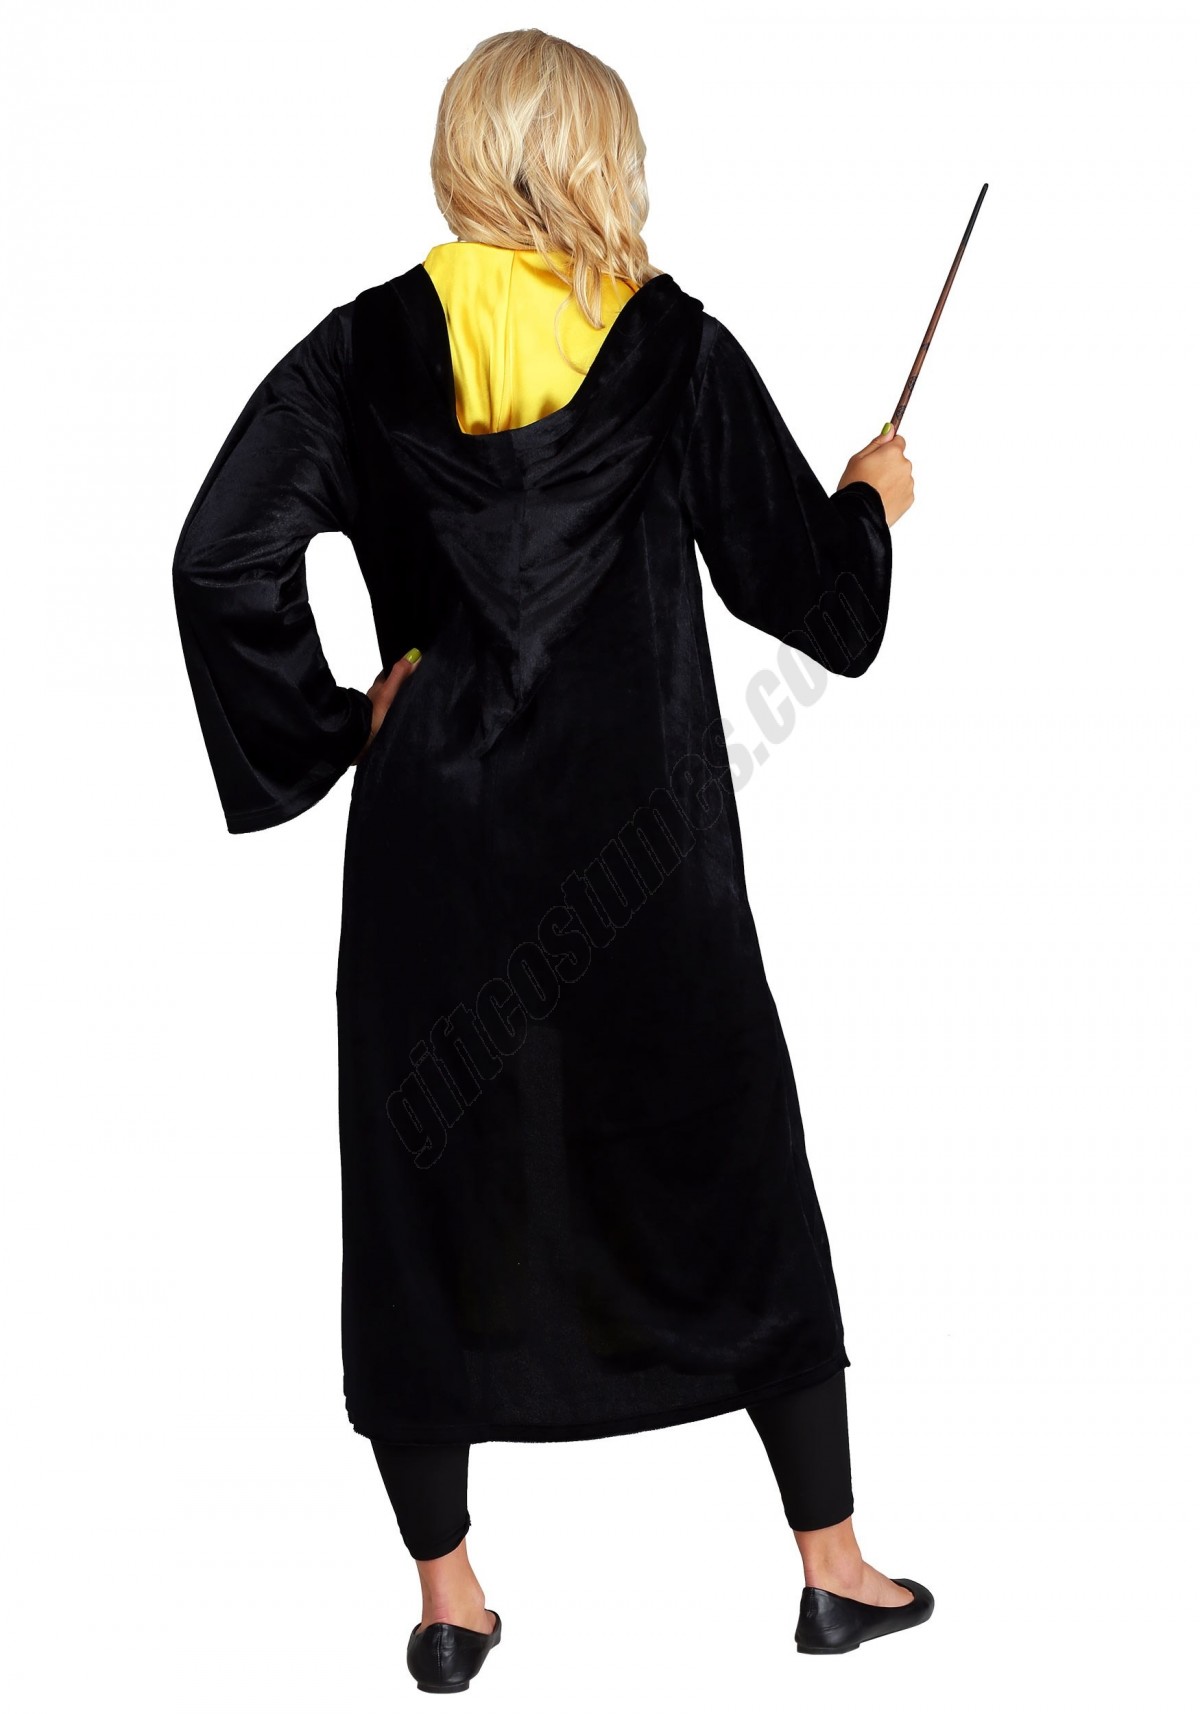 Deluxe Harry Potter Adult Plus Size Hufflepuff Robe Costume Promotions - -1